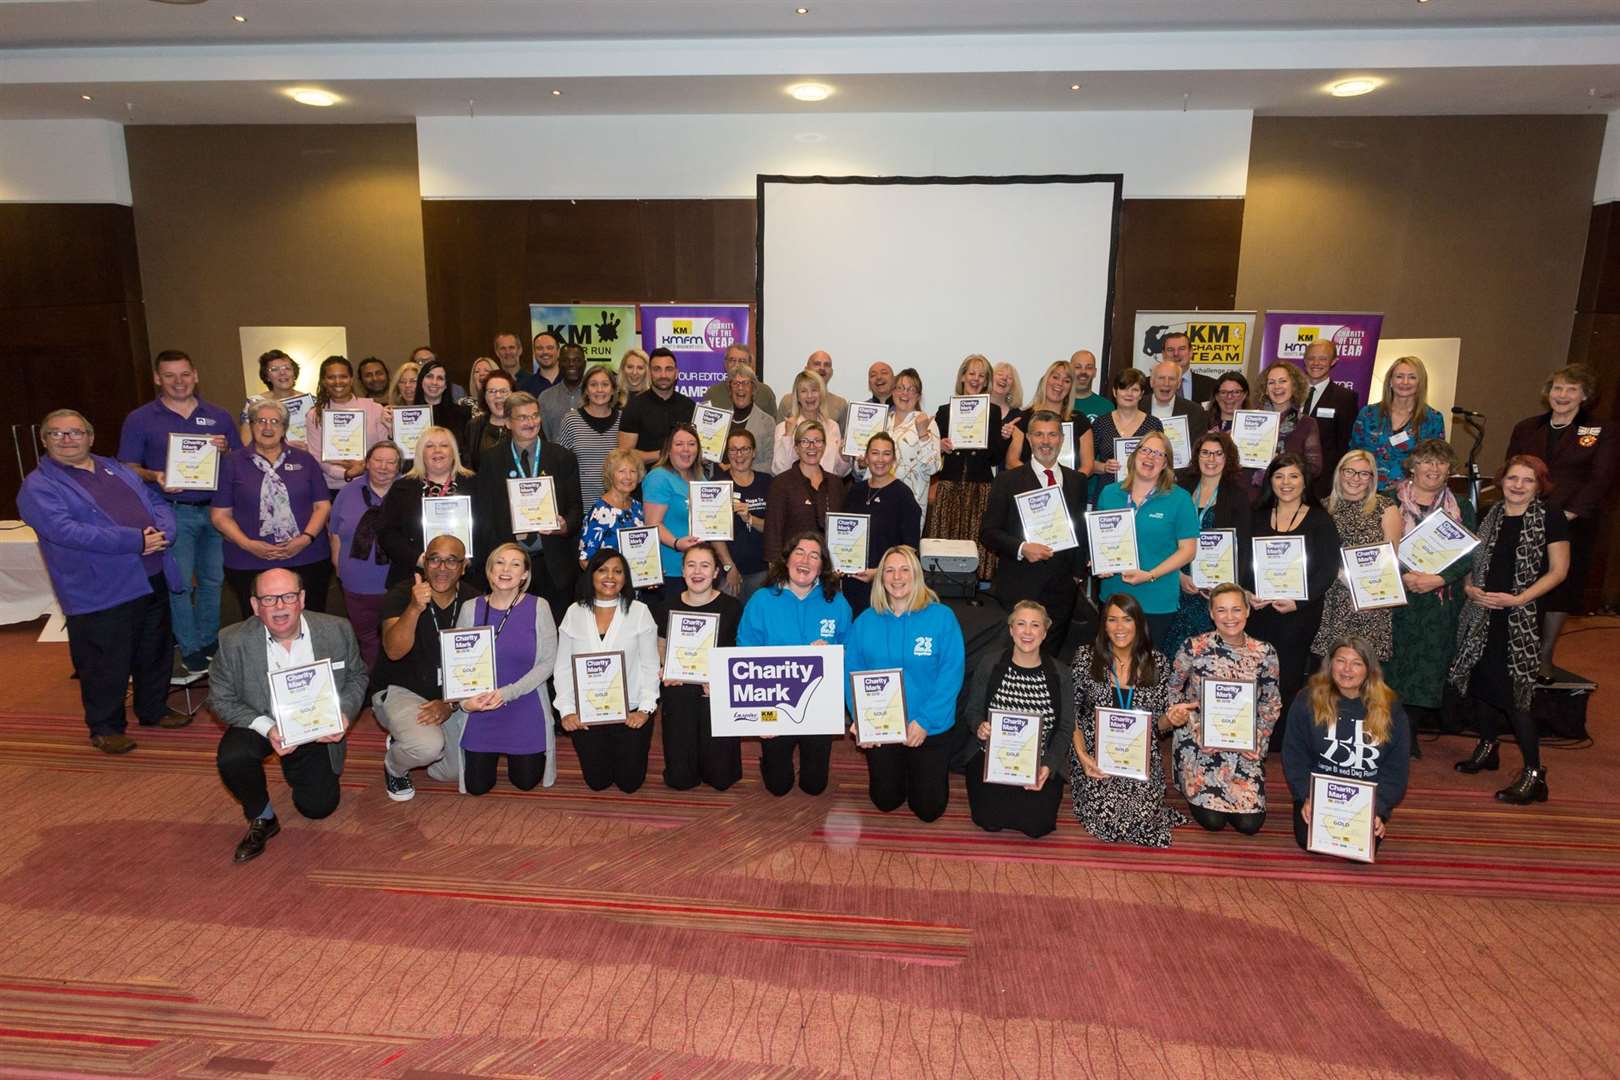 KM Charity Mark 2019 winners plus supporters at the KM Charity Team’s annual forum at the Ashford International Hotel.